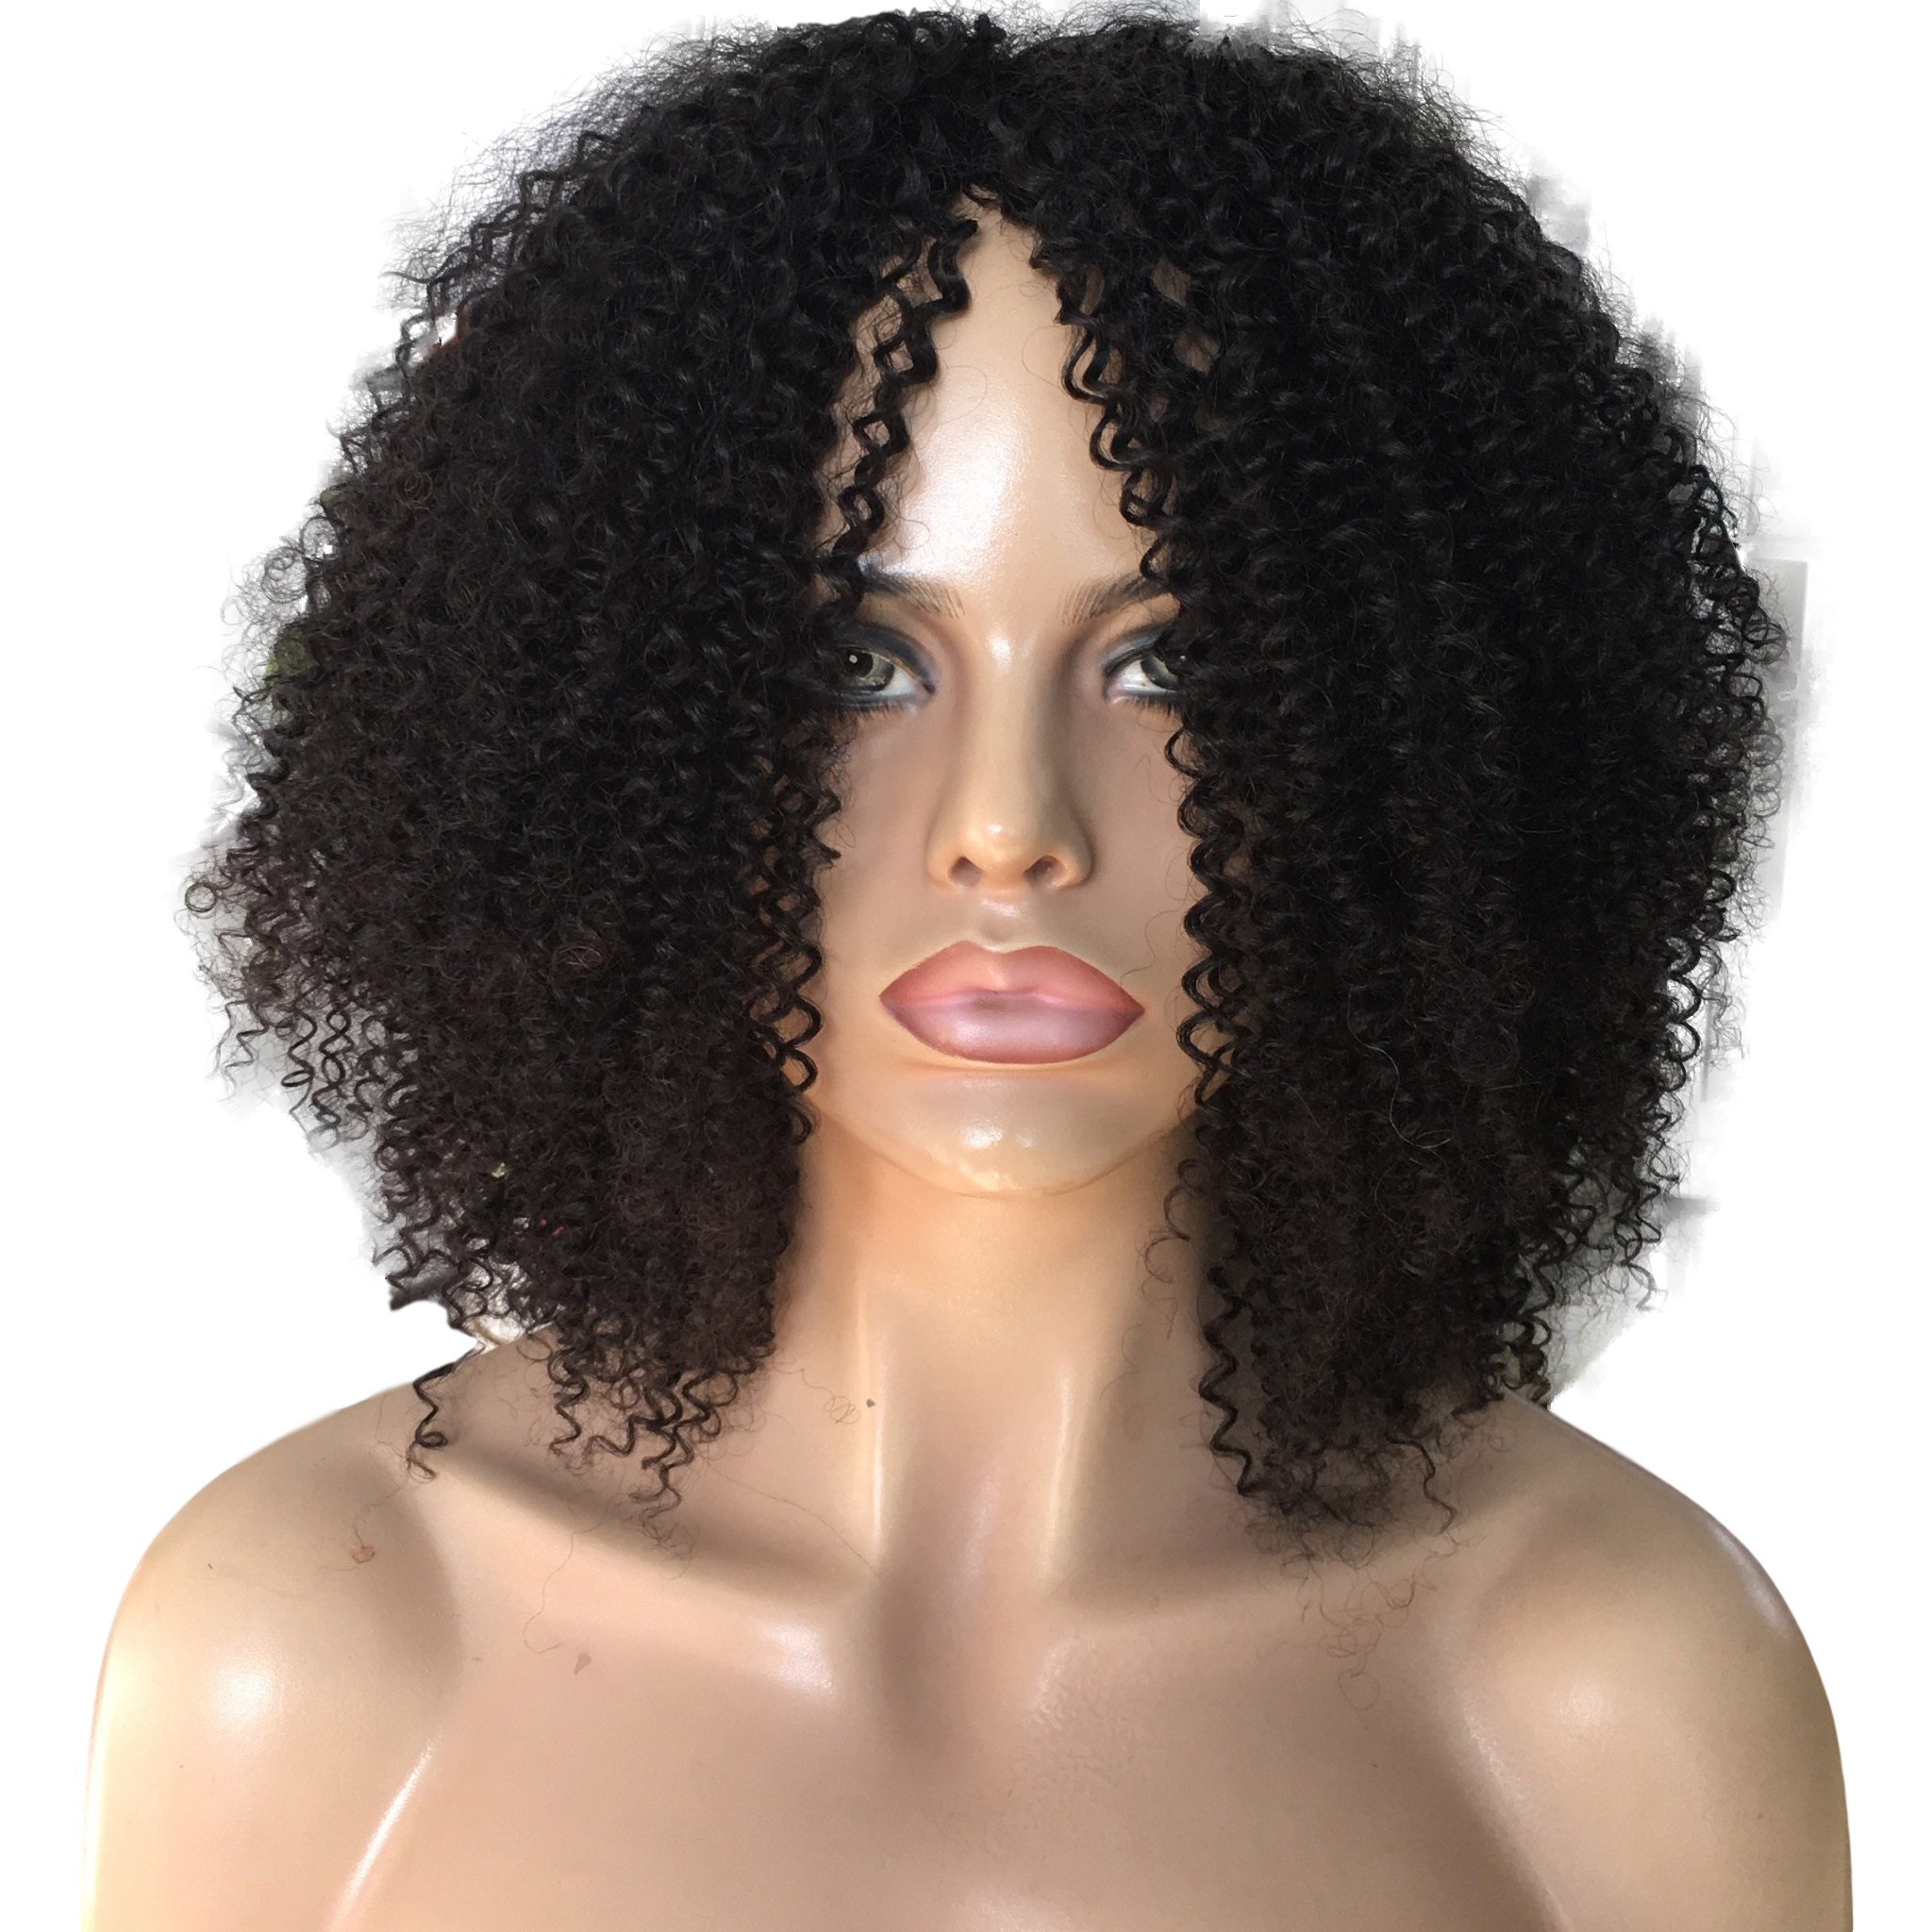 Tavia” Lace Front Human Hair Wig - Legacy Lace Wigs